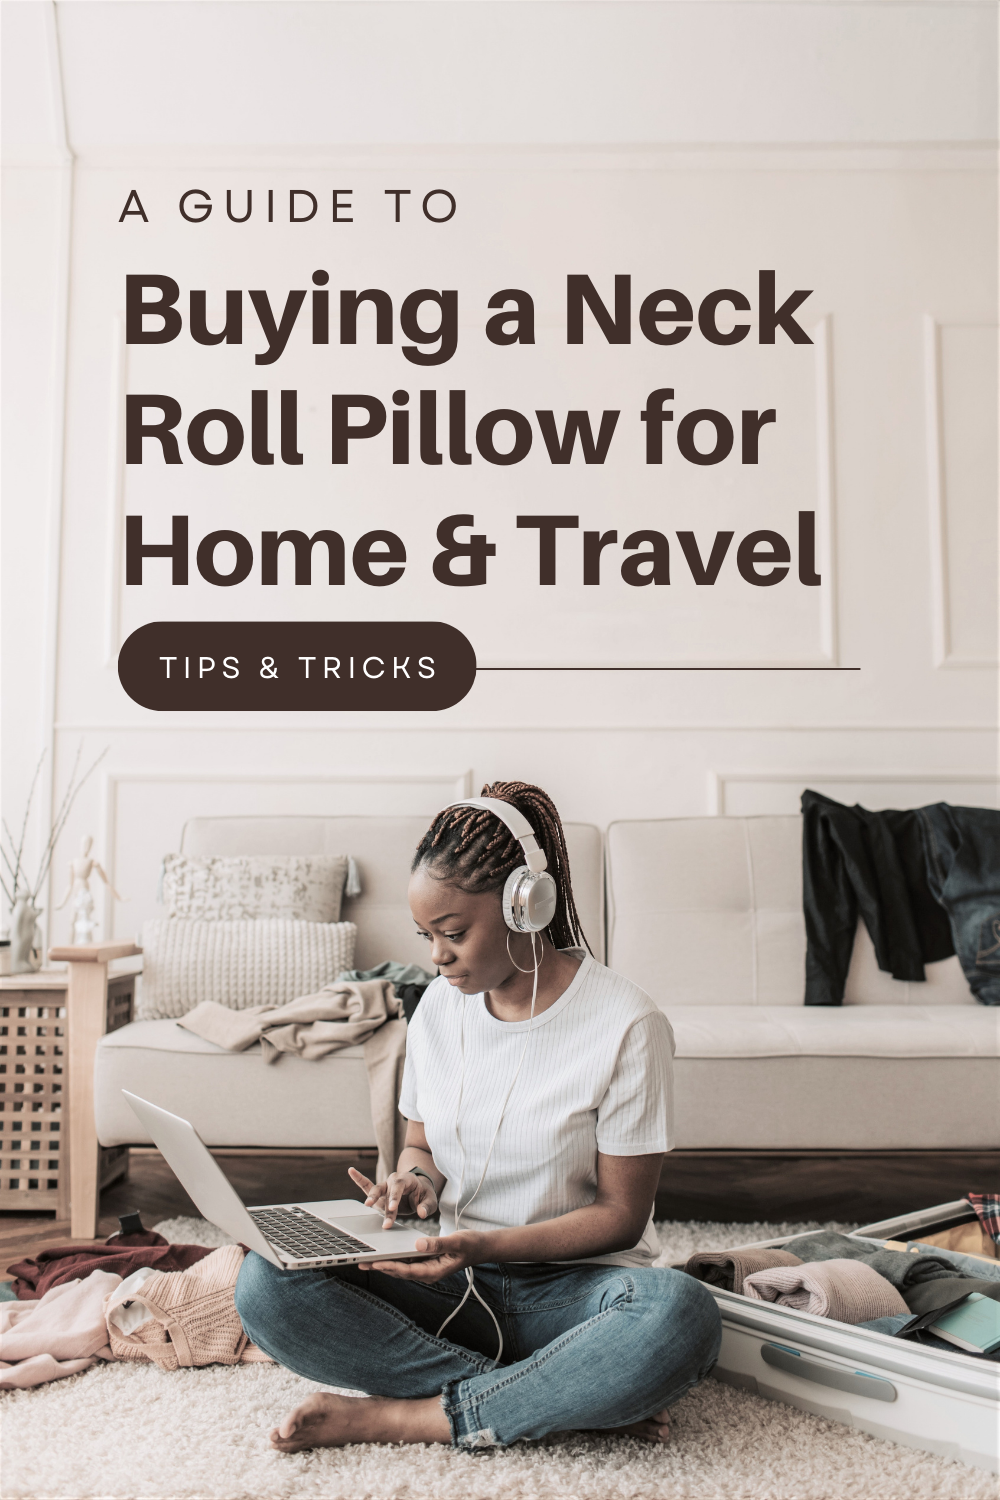 A woman sits in the living room on her laptop, surrounding her are clothes that she is packing away into a suitcase. This article offers a guide to buying a neck roll pillow for home and travel.